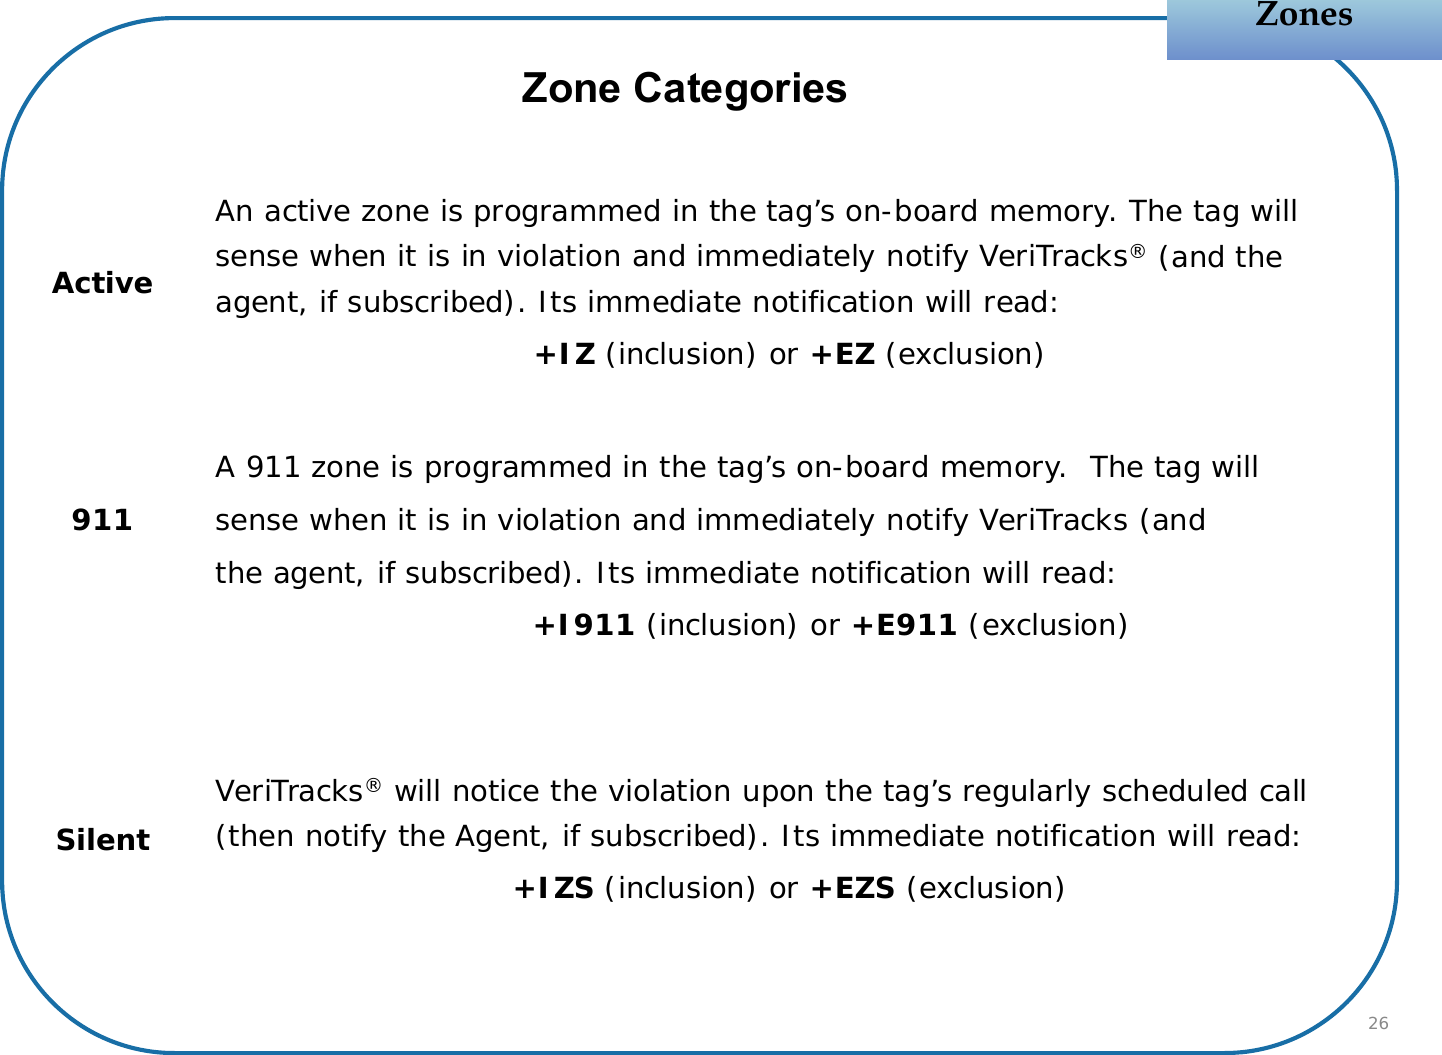 ZonesZonesActiveAn active zone is programmed in the tag’s on-board memory. The tag will sense when it is in violation and immediately notify VeriTracks®(and the agent, if subscribed). Its immediate notification will read:+IZ (inclusion) or +EZ (exclusion)911A 911 zone is programmed in the tag’s on-board memory.  The tag will sense when it is in violation and immediately notify VeriTracks (and the agent, if subscribed). Its immediate notification will read:+I911 (inclusion) or +E911 (exclusion)SilentVeriTracks®will notice the violation upon the tag’s regularly scheduled call (then notify the Agent, if subscribed). Its immediate notification will read:+IZS (inclusion) or +EZS (exclusion)26Zone Categories